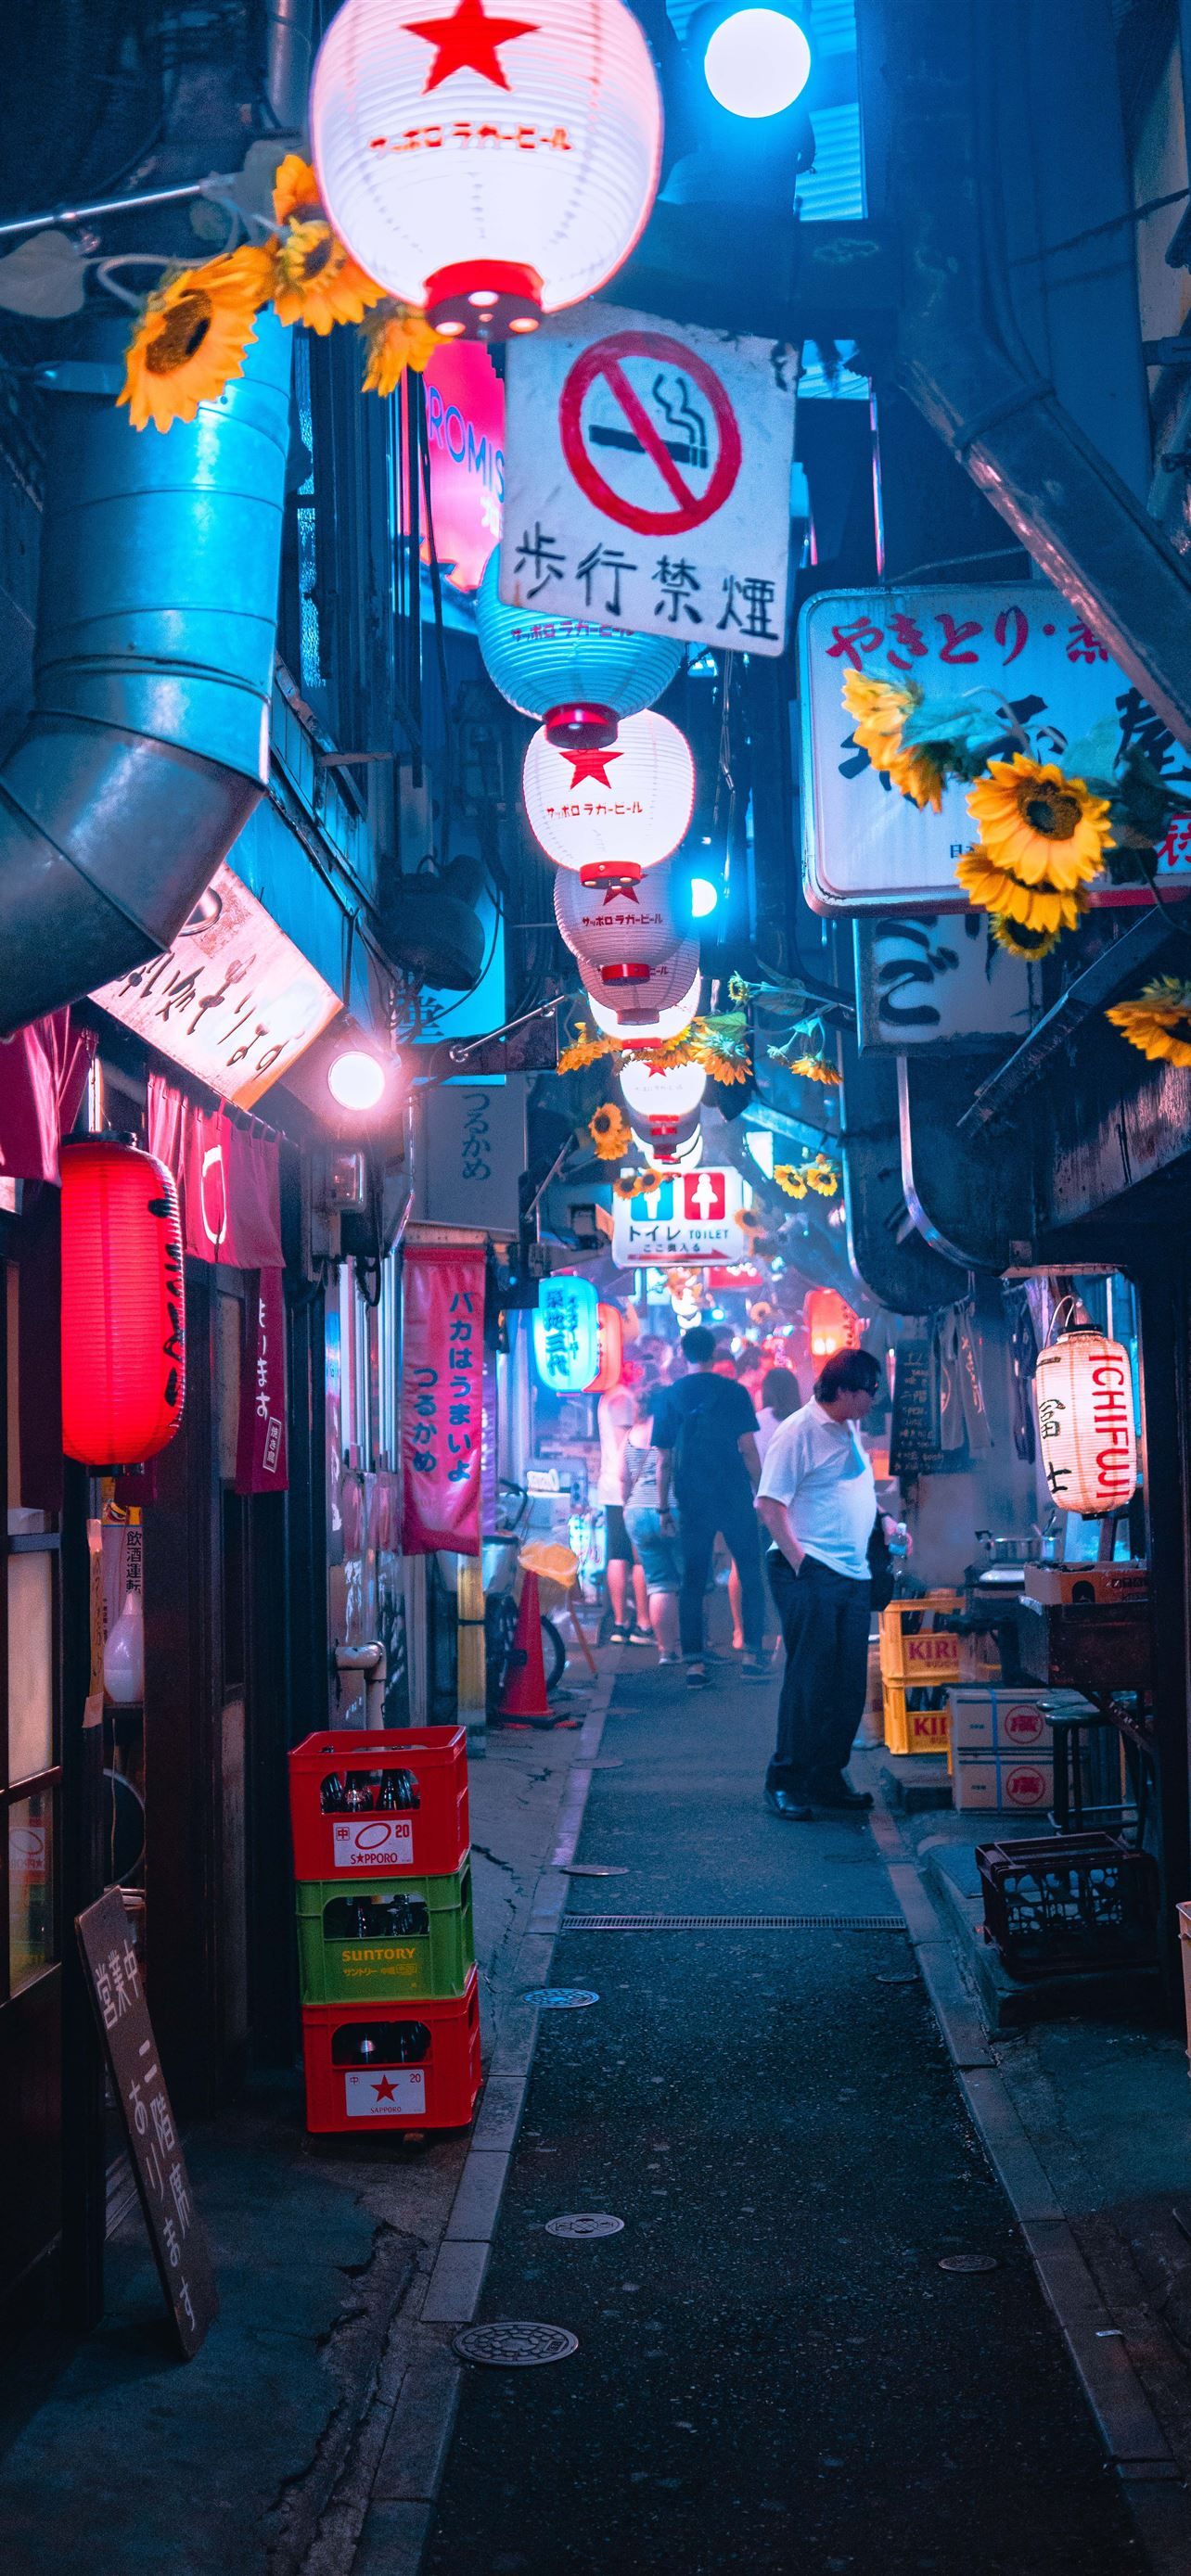 A dark alleyway with neon lights and signs. - Tokyo